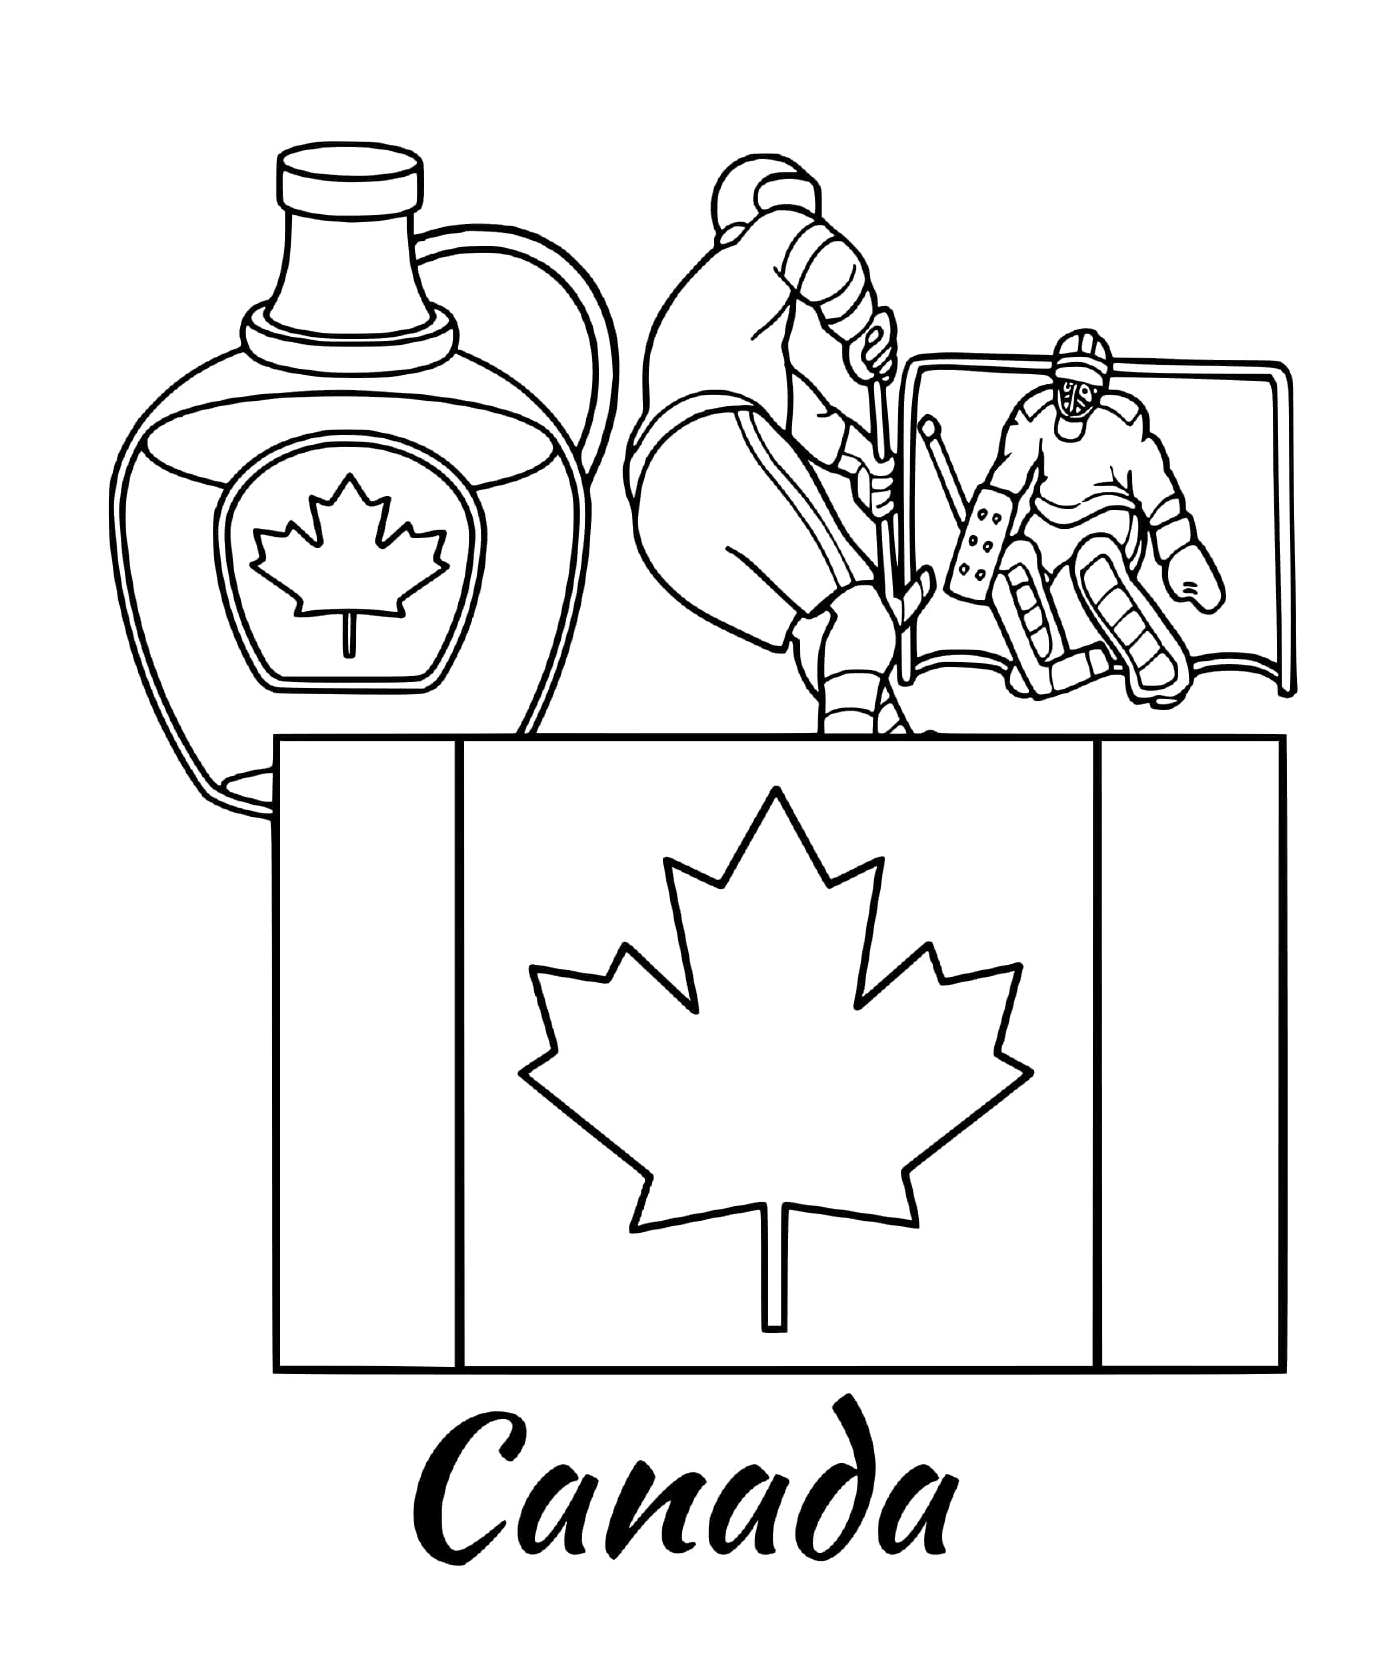  Flag of Canada with Maple 